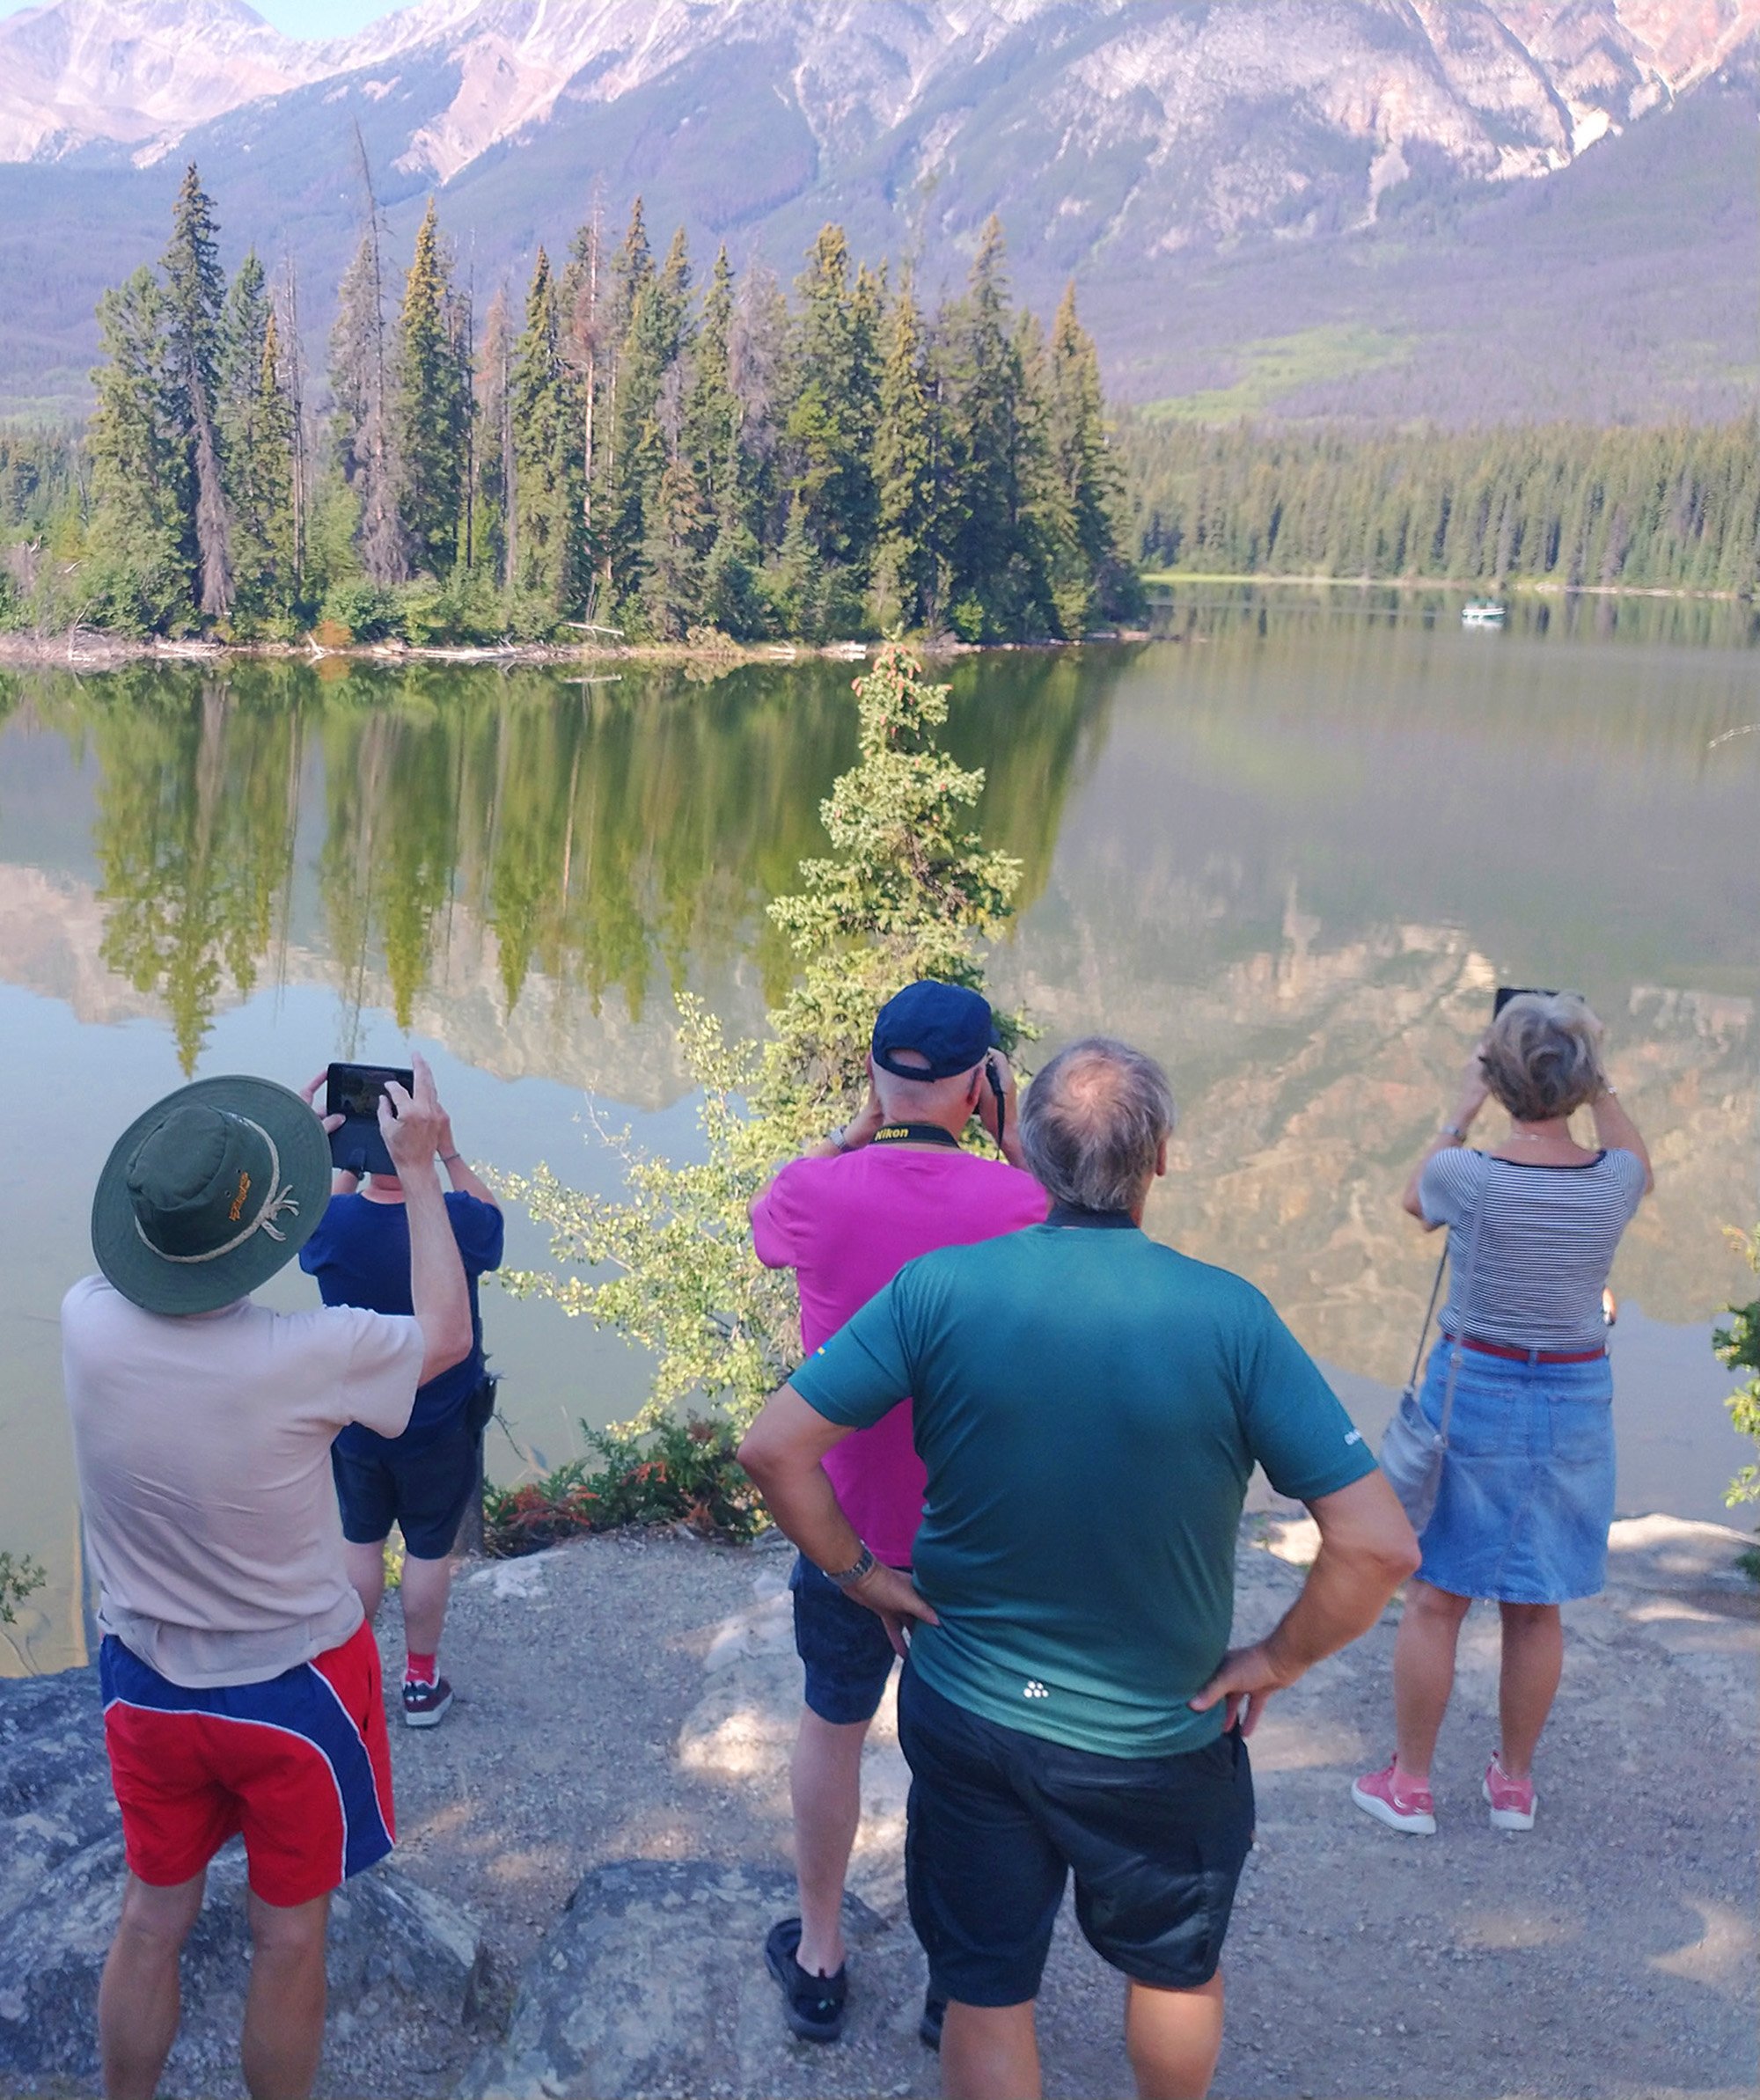 The many boomer/asian tourists of Jasper in their natural habitat. 